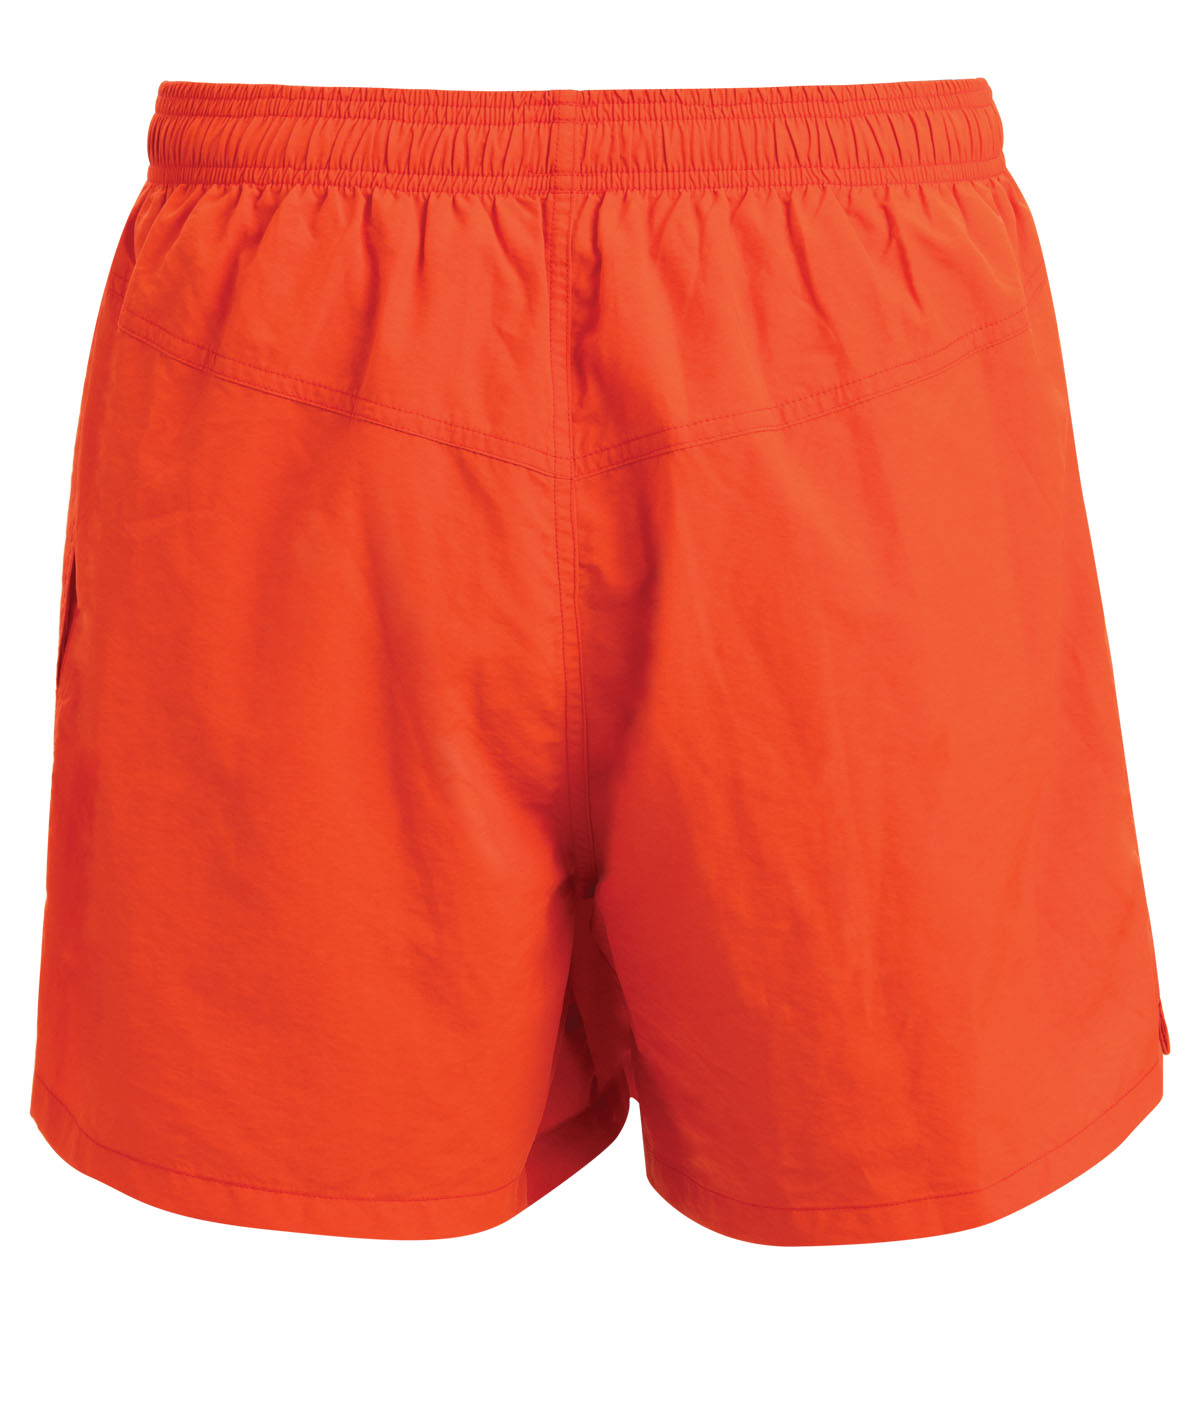 Men's Solid 5 Inch Water Shorts Swimsuit